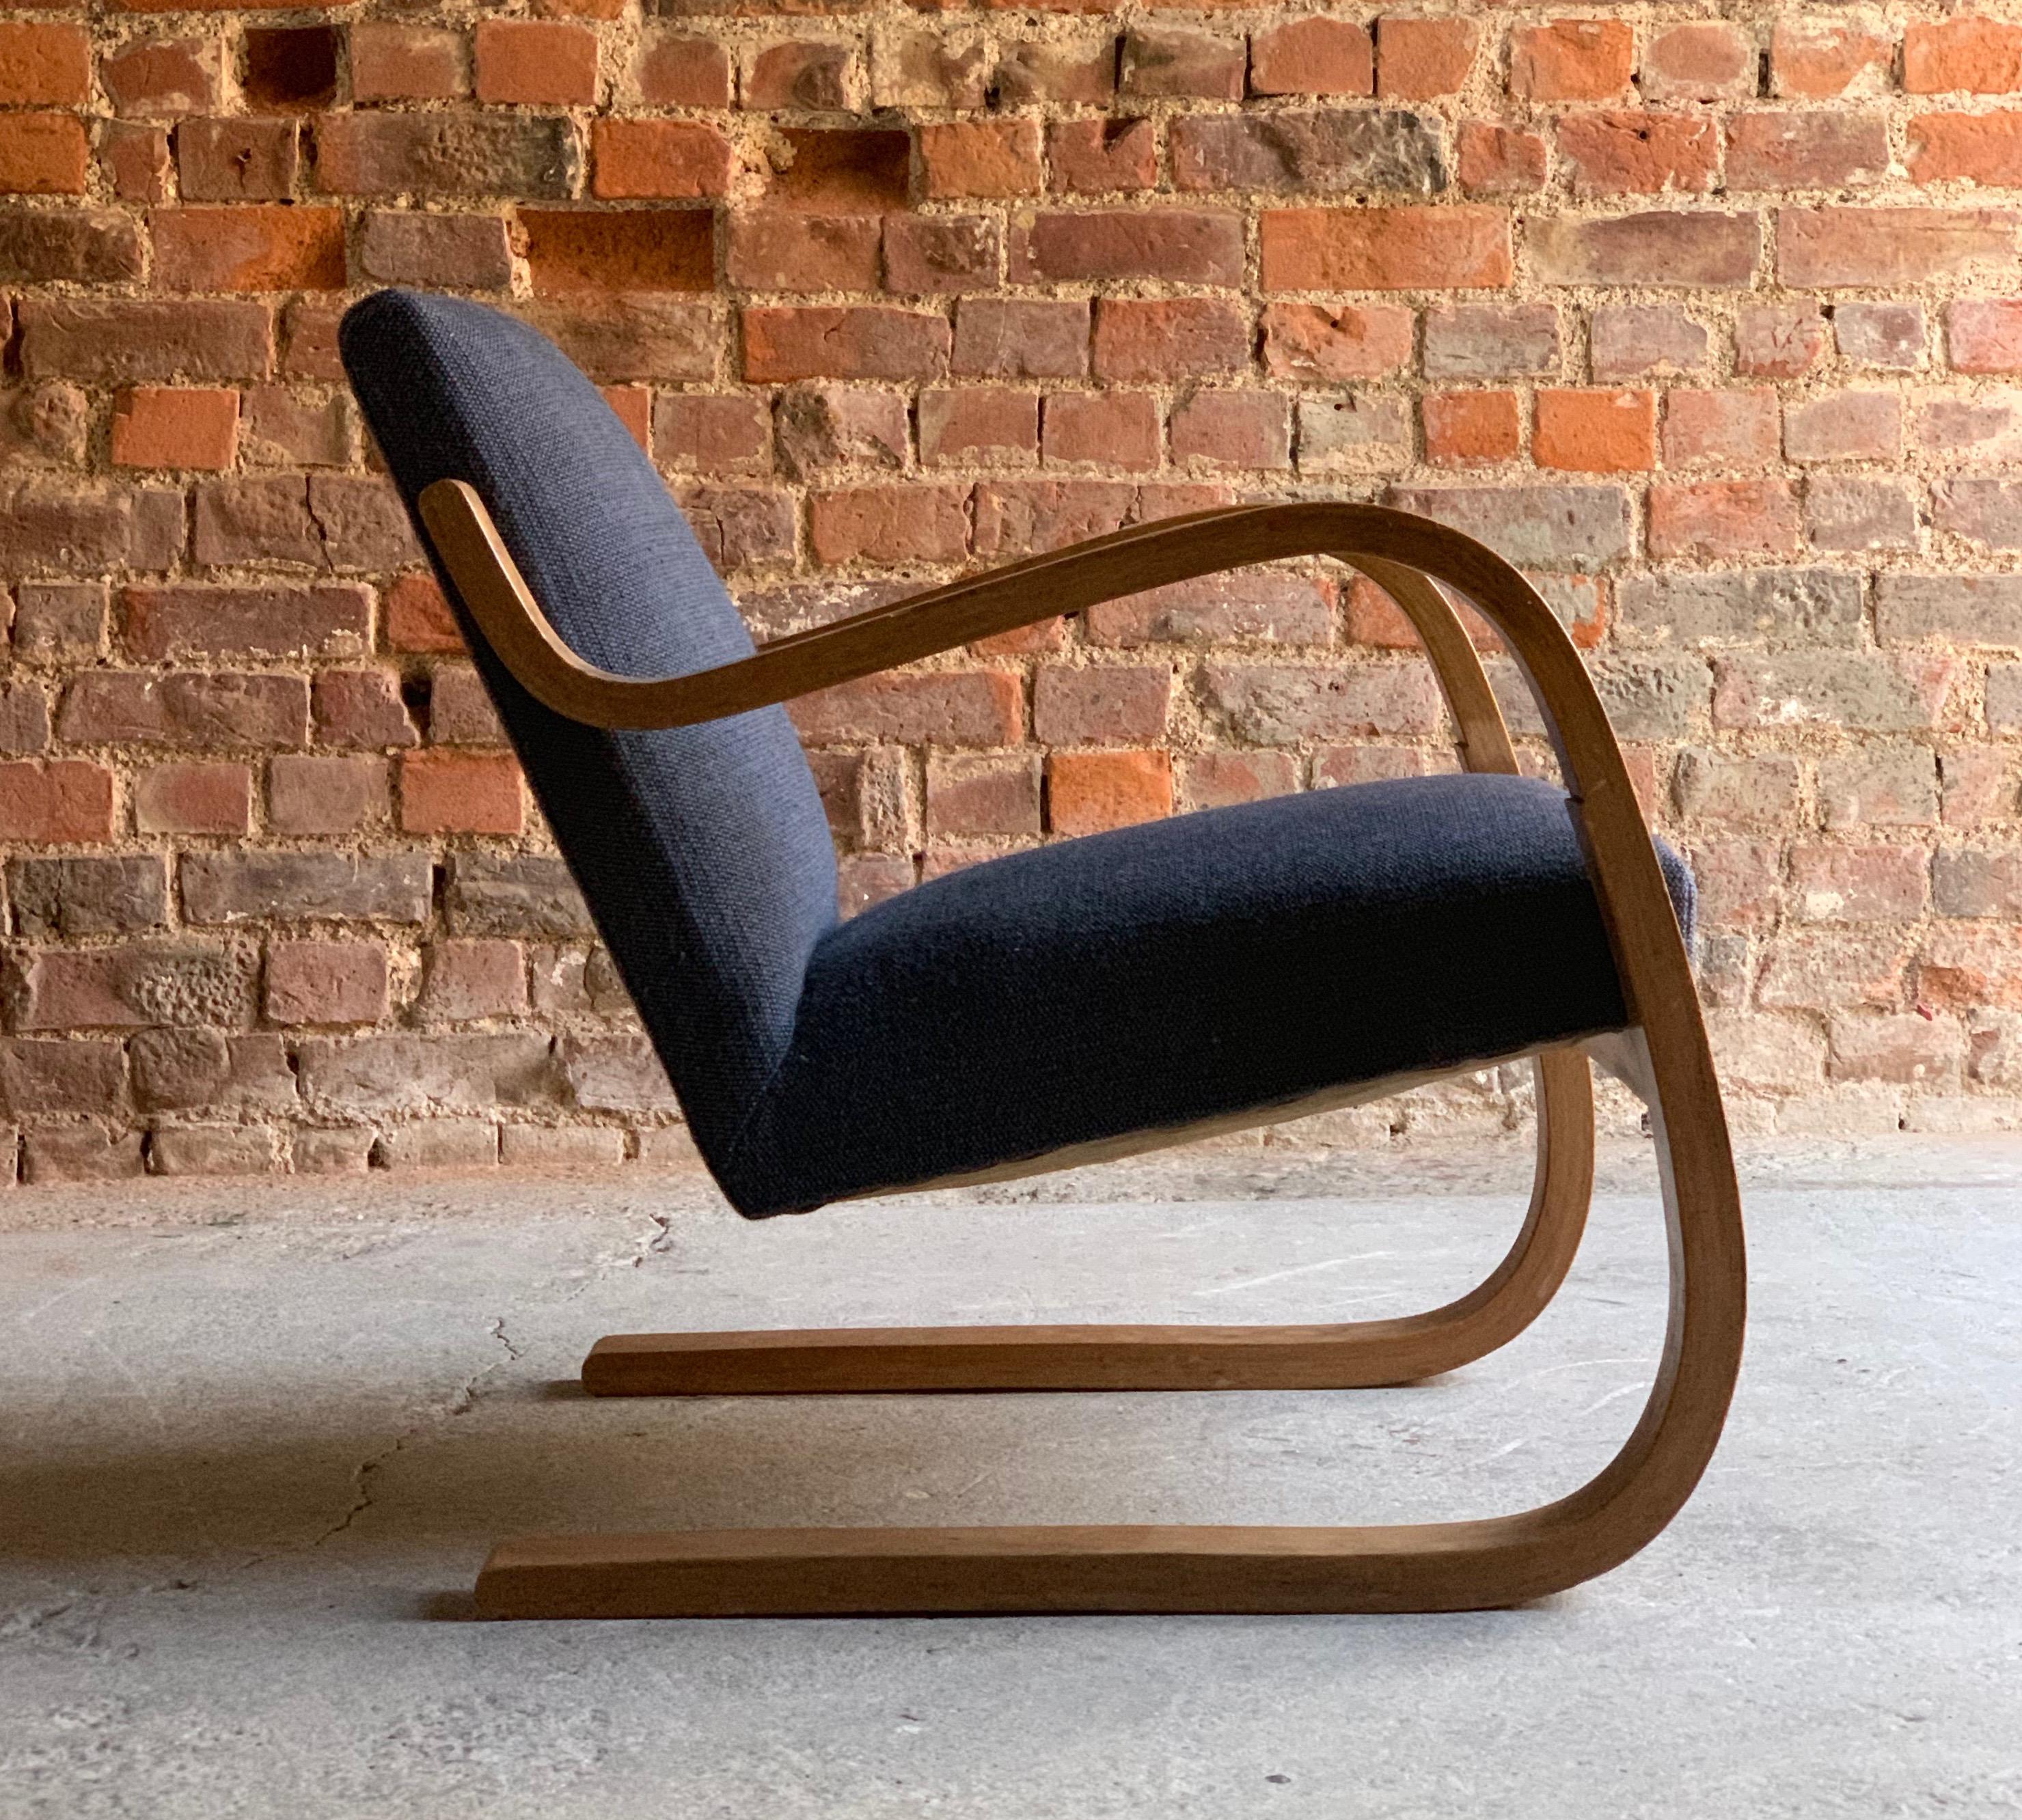 Alvar Aalto Model 402 lounge chair cantilever armchair original Finland circa 1930s

Early 20th century Alvar Aalto Model 402 lounge chair circa Finland 1930s, this fabulous armchair is an original 402 Alvar Aalto and was produced by Finmar in